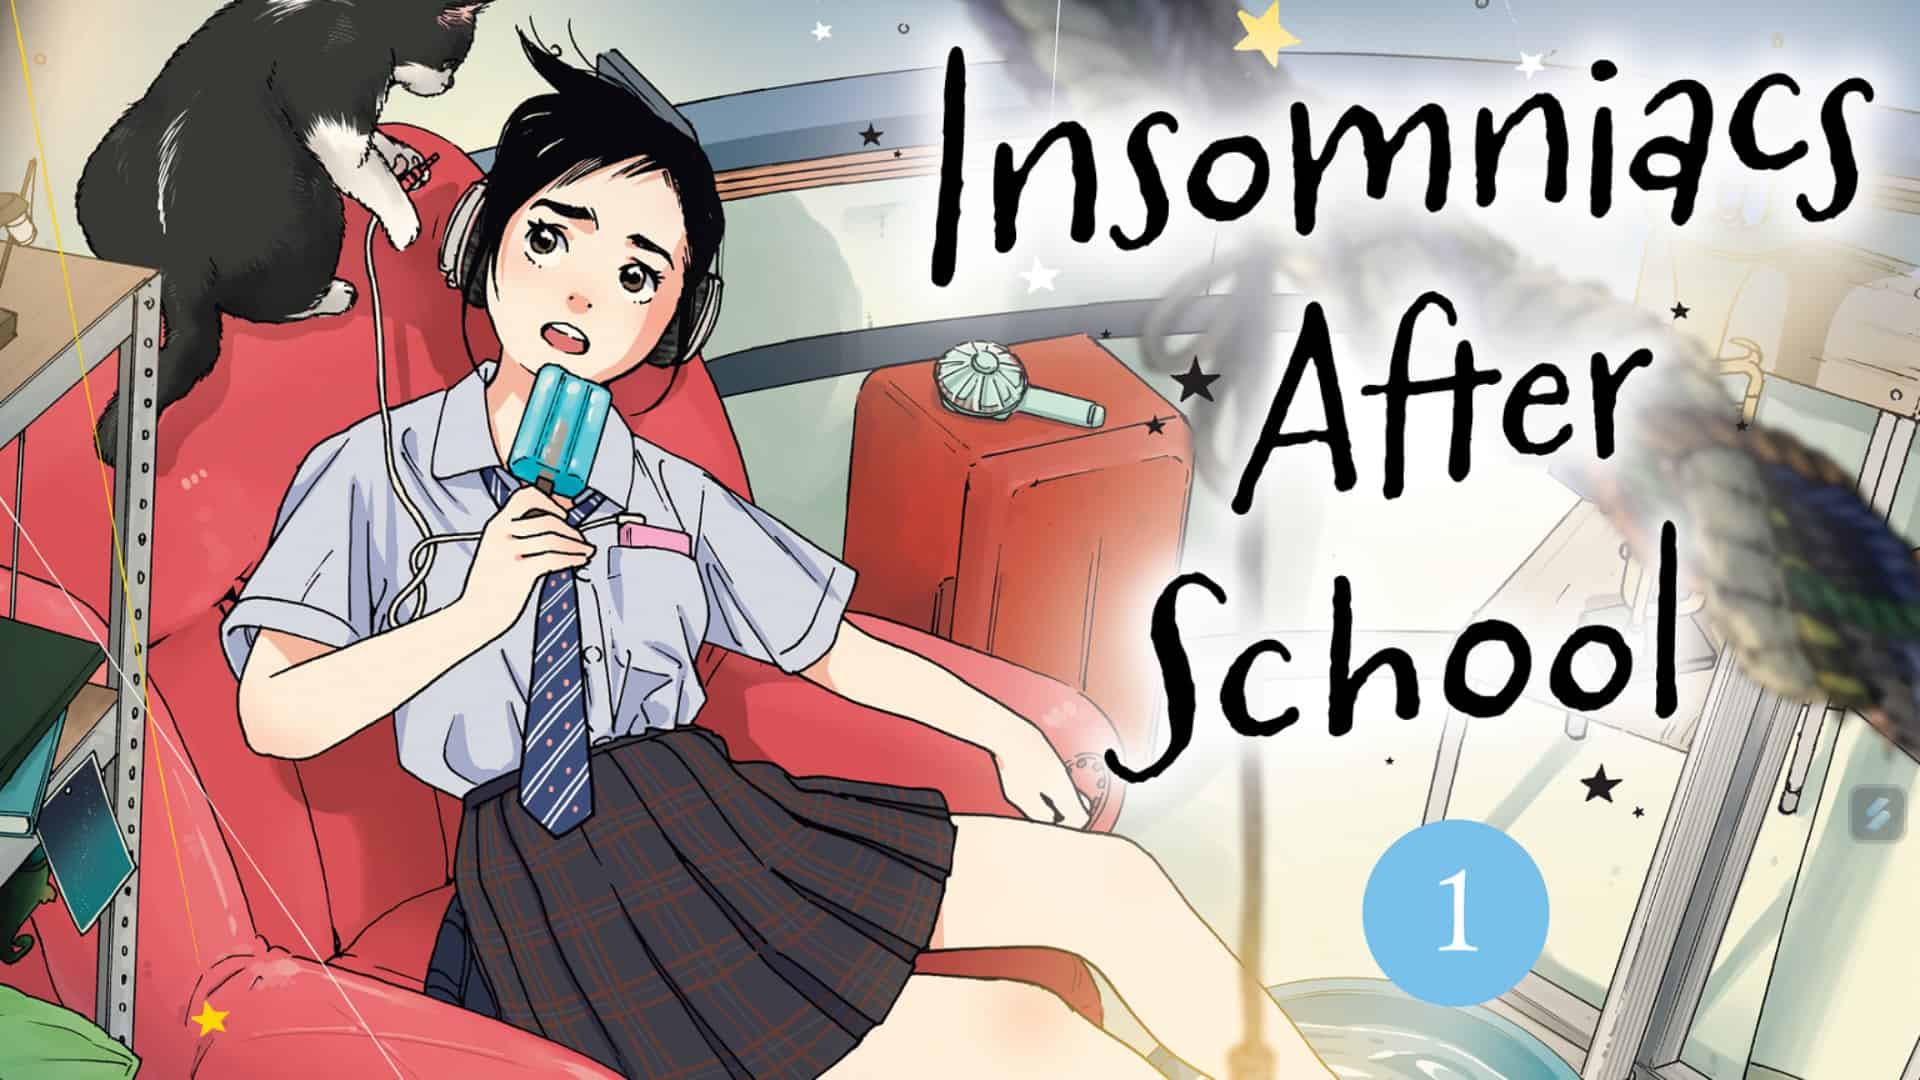 Manga Review: Insomniacs After School Vol. 1